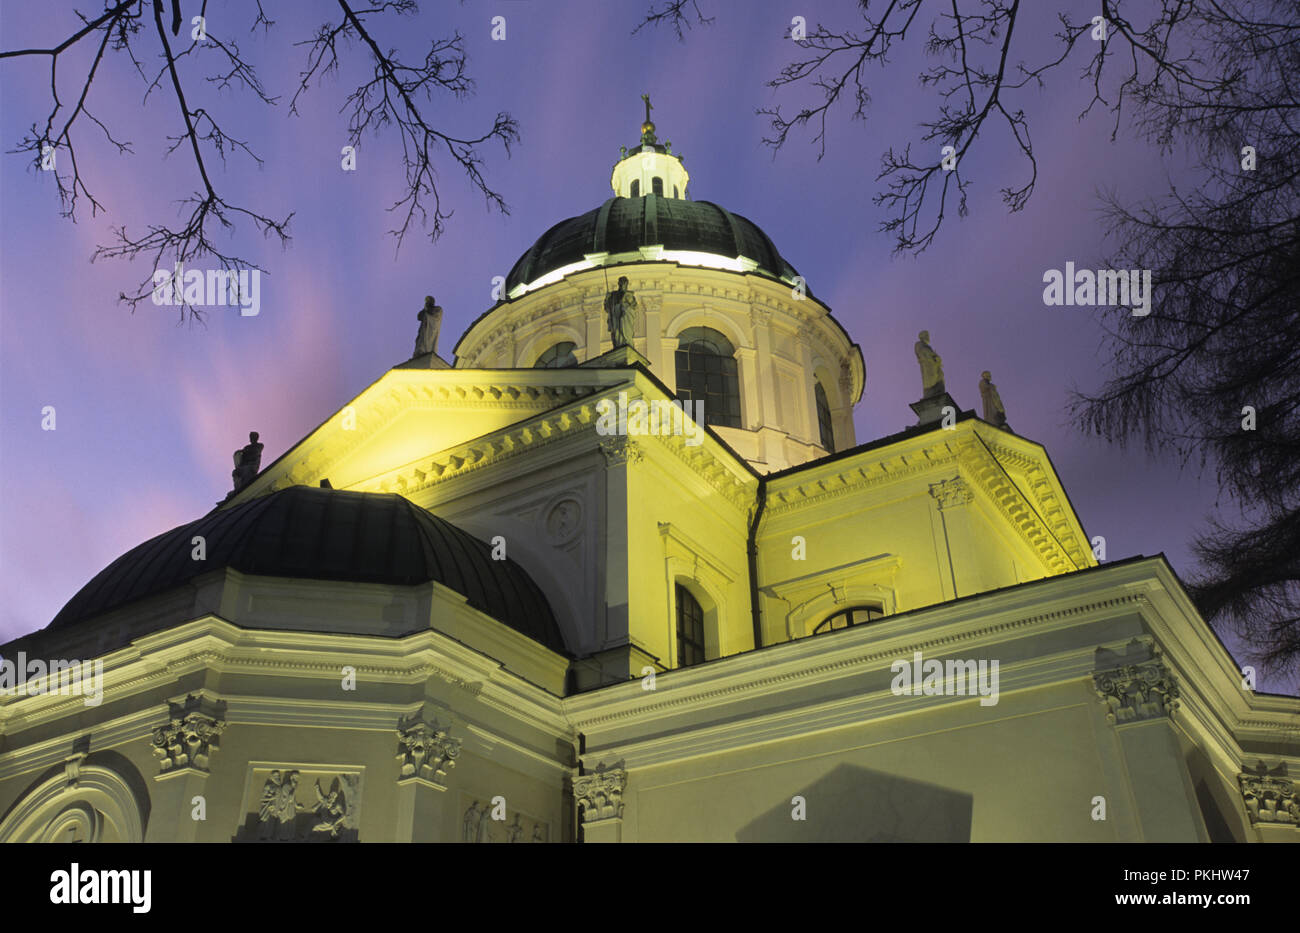 St Anne's Church near Wilanow Palace in Warsaw Poland. Built 1780s picture taken March 2008 Stock Photo